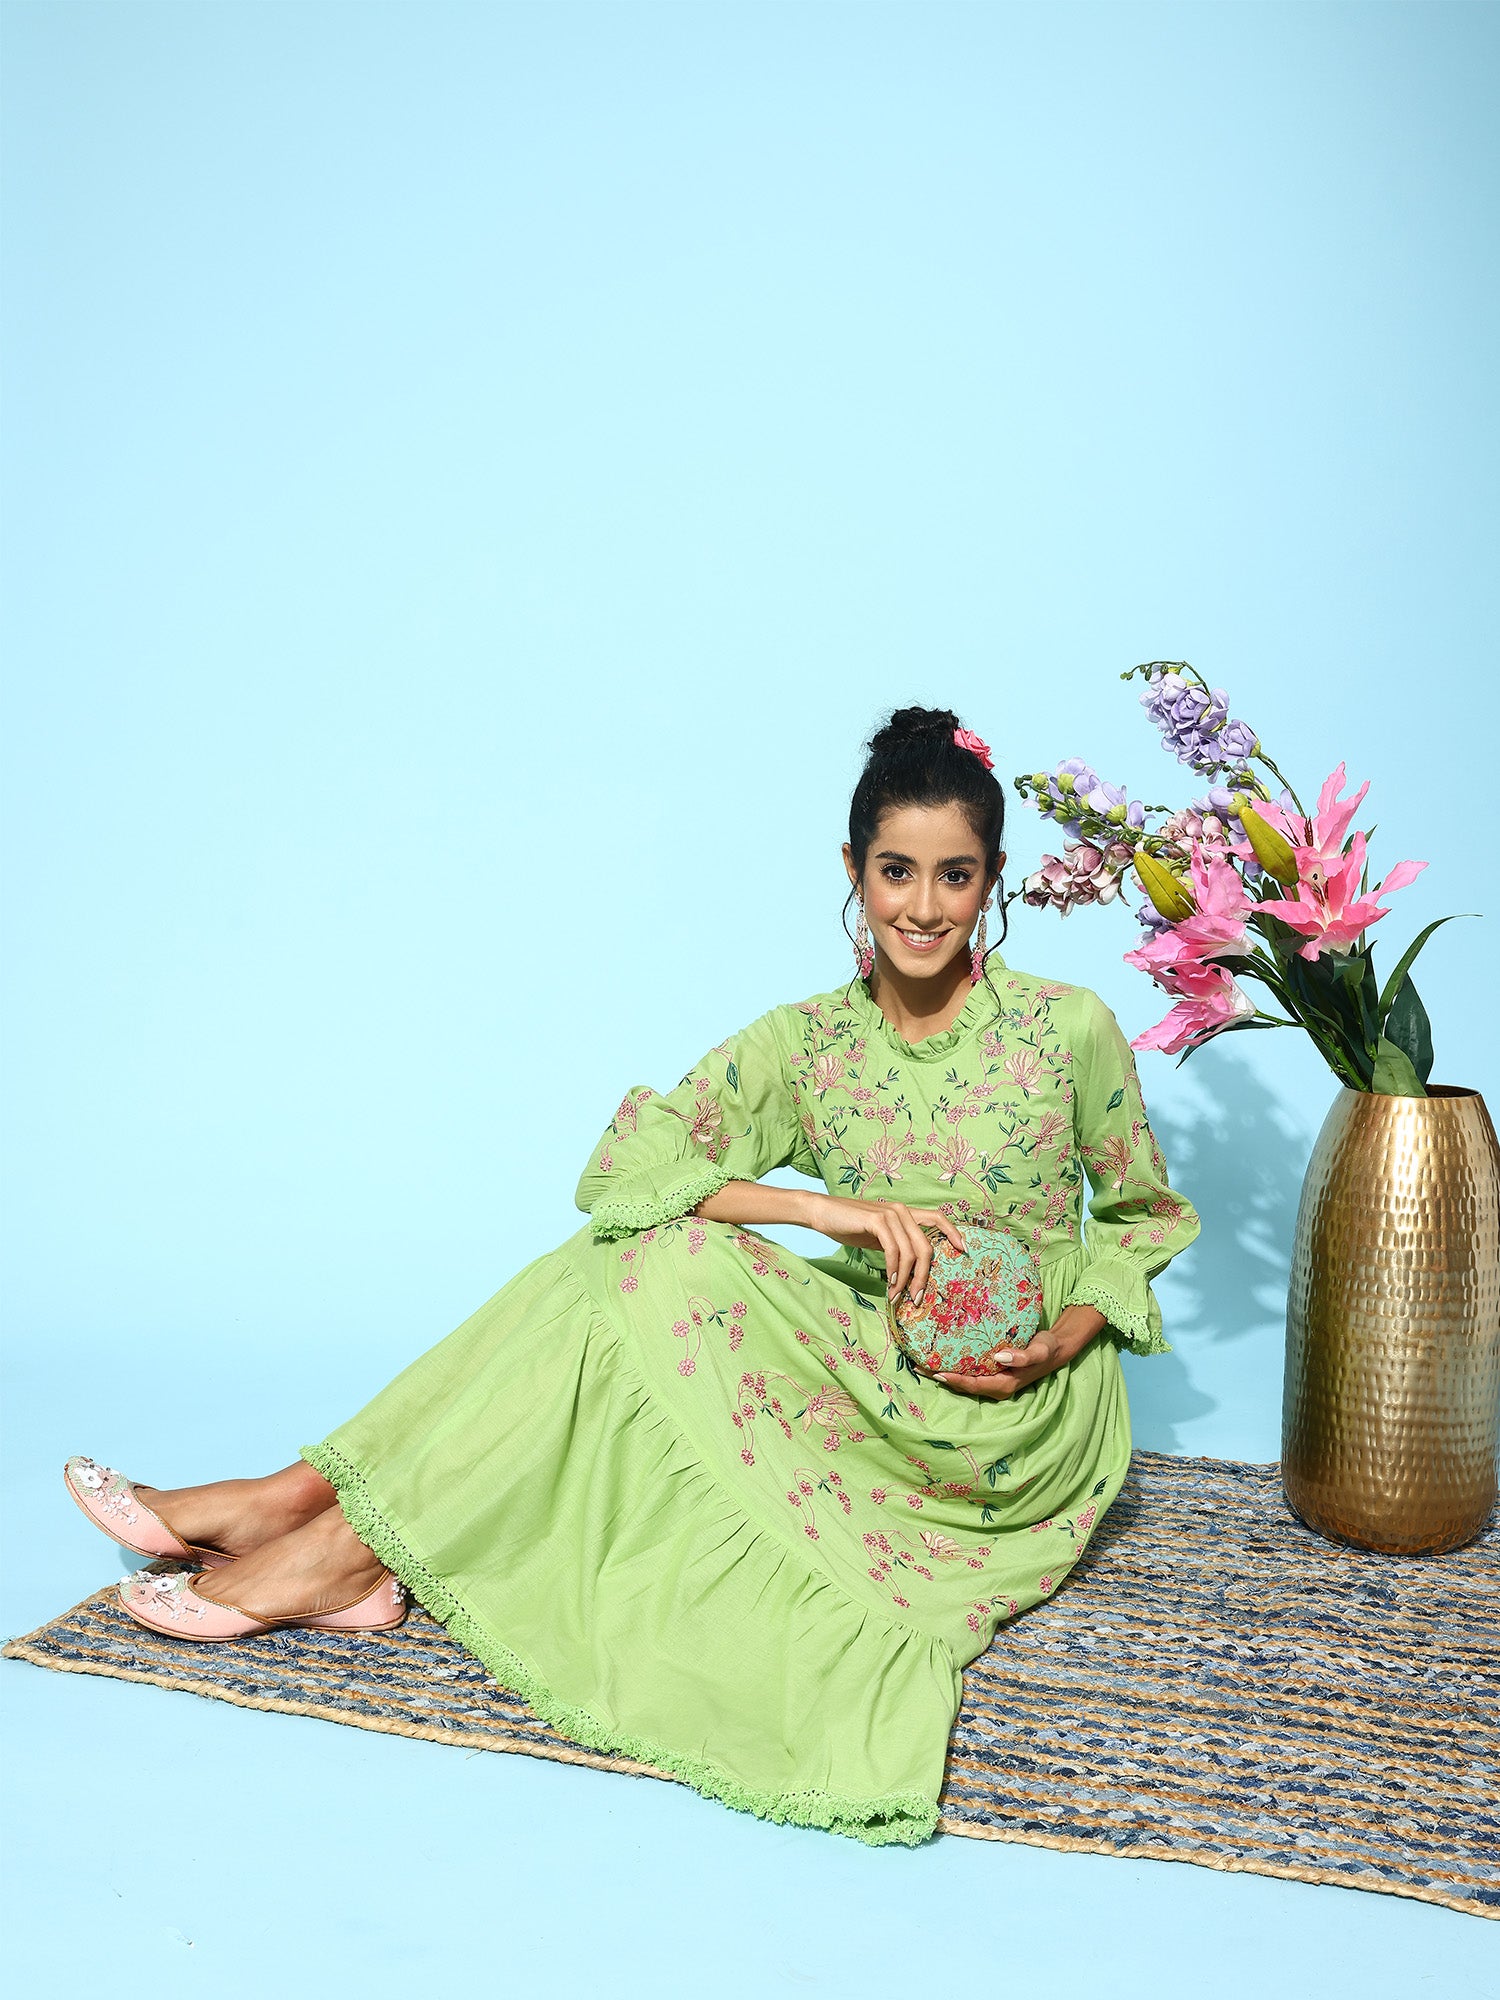 Indo Era Green Floral Embroidered Embellished Bell Sleeves A-Line Midi Ethnic Dress